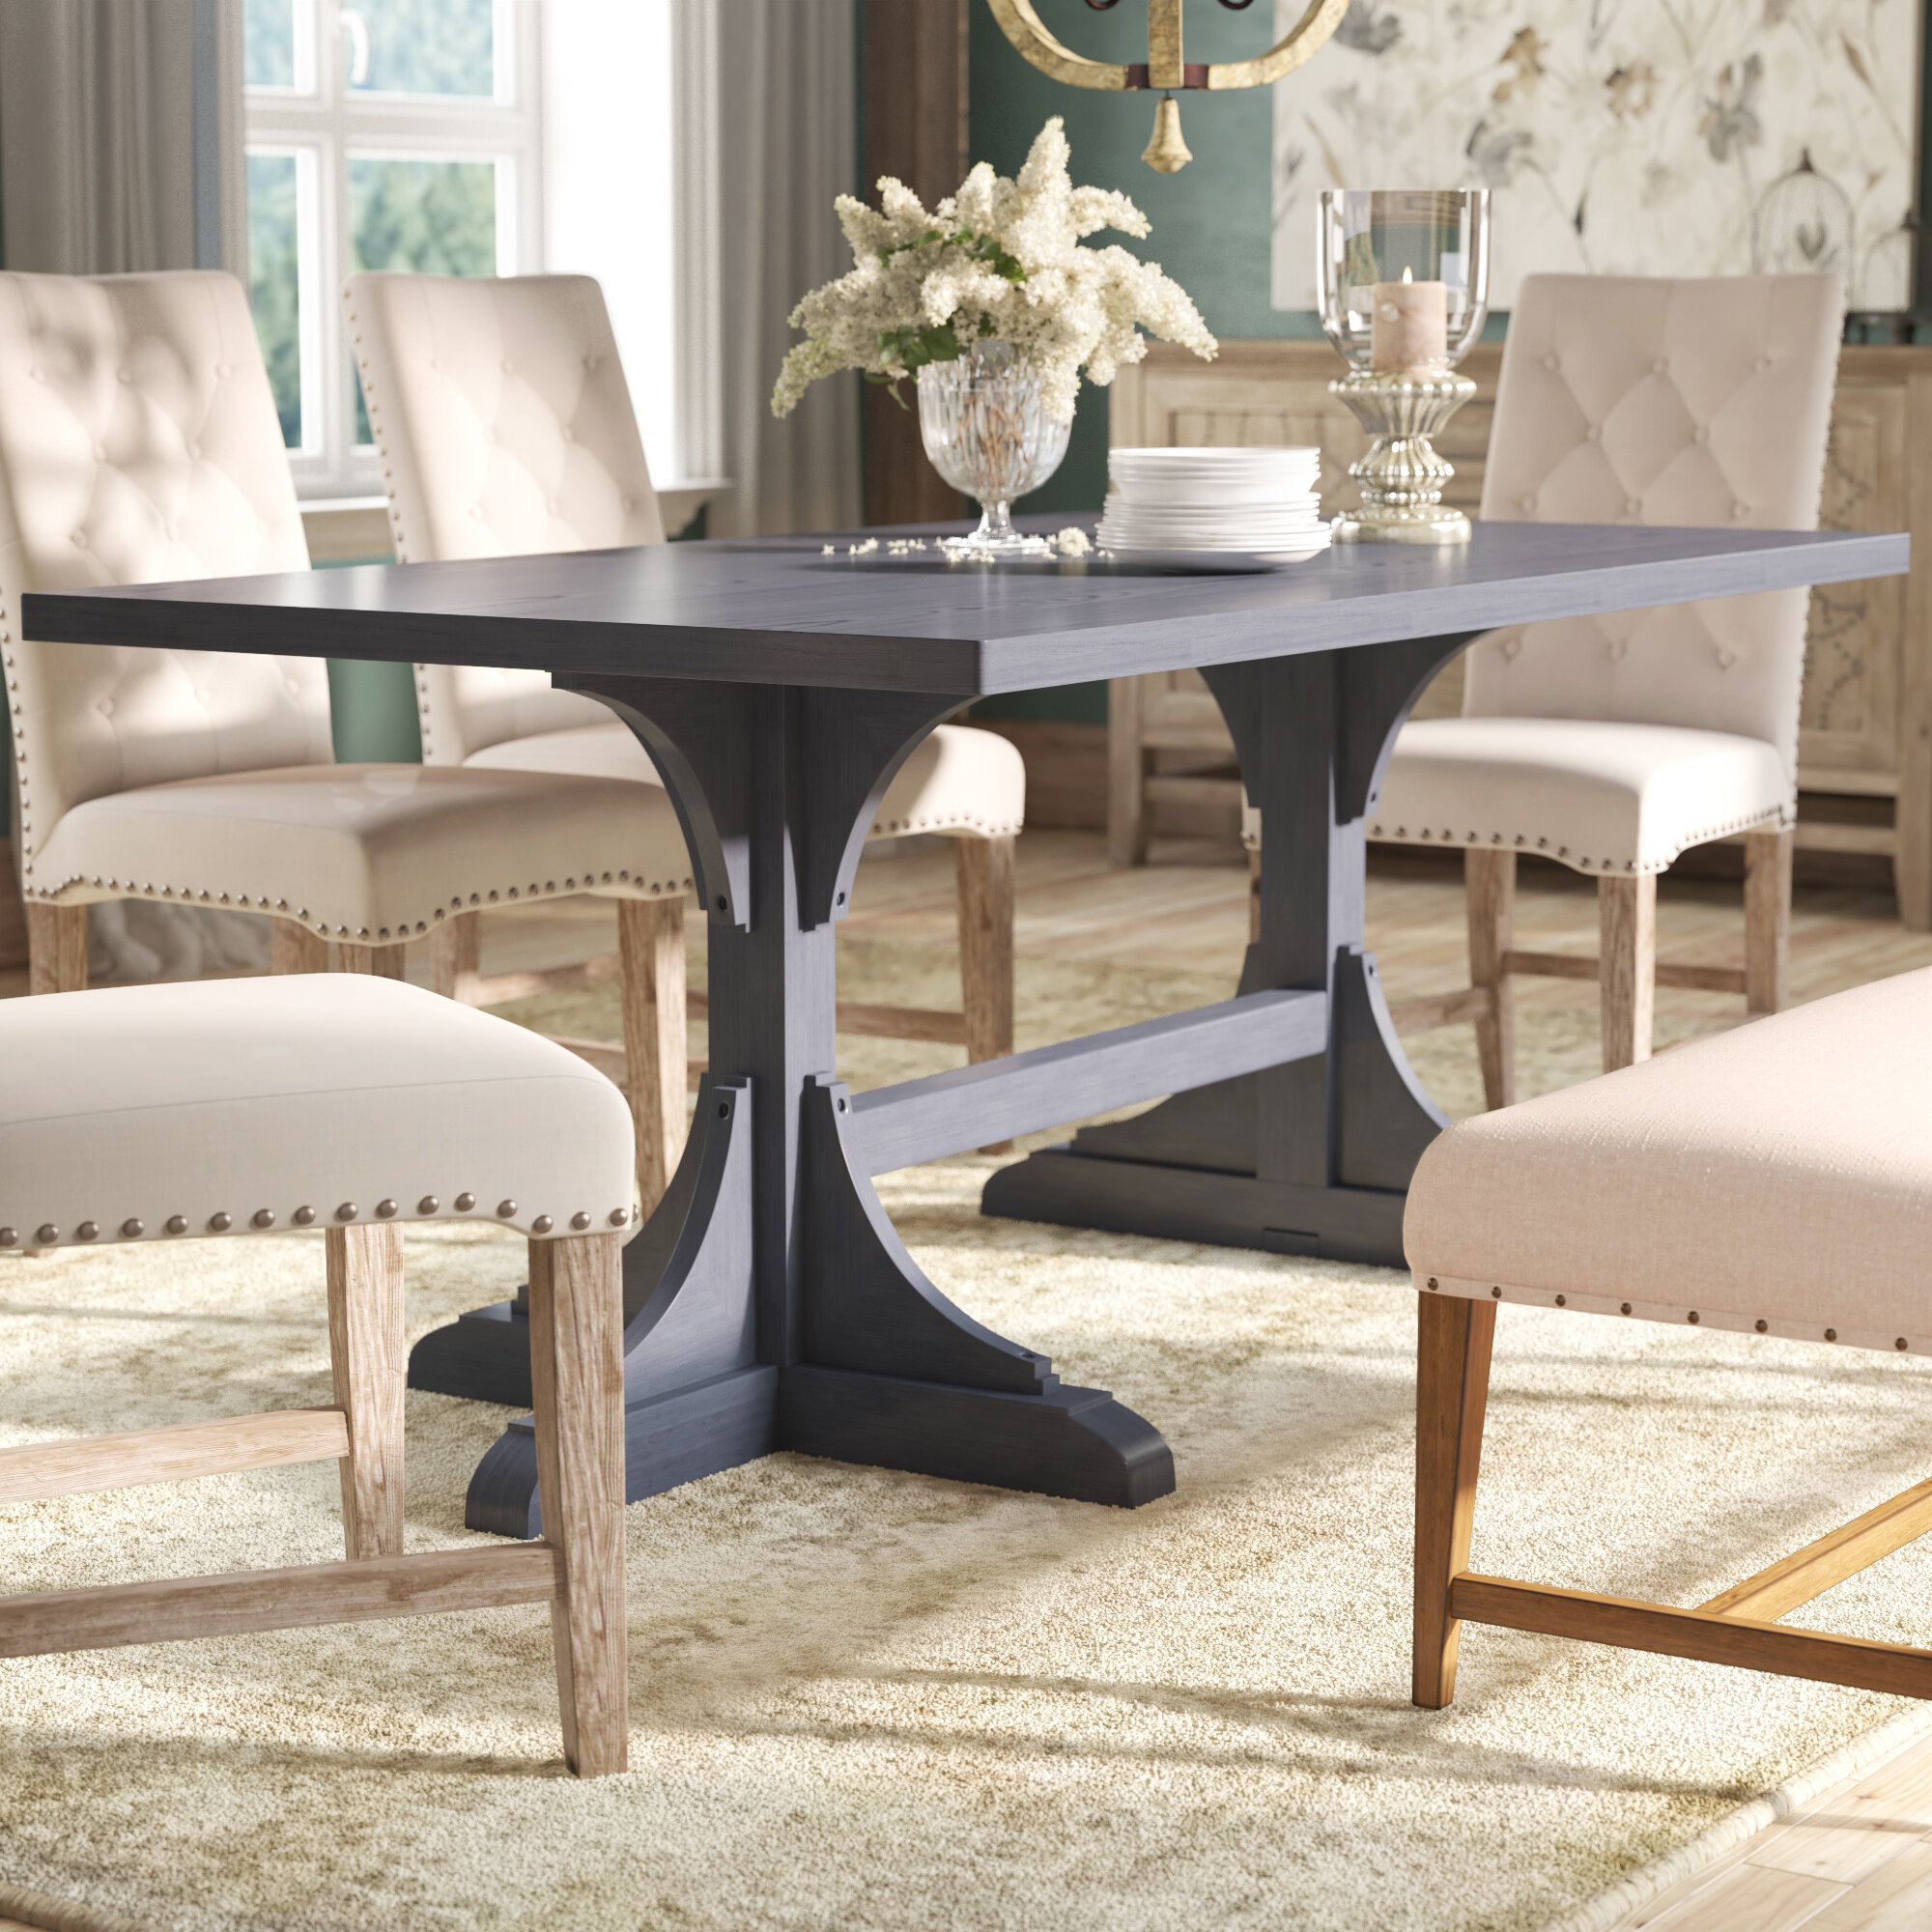 Darby Home Co Harristown Dining Table Reviews Wayfair